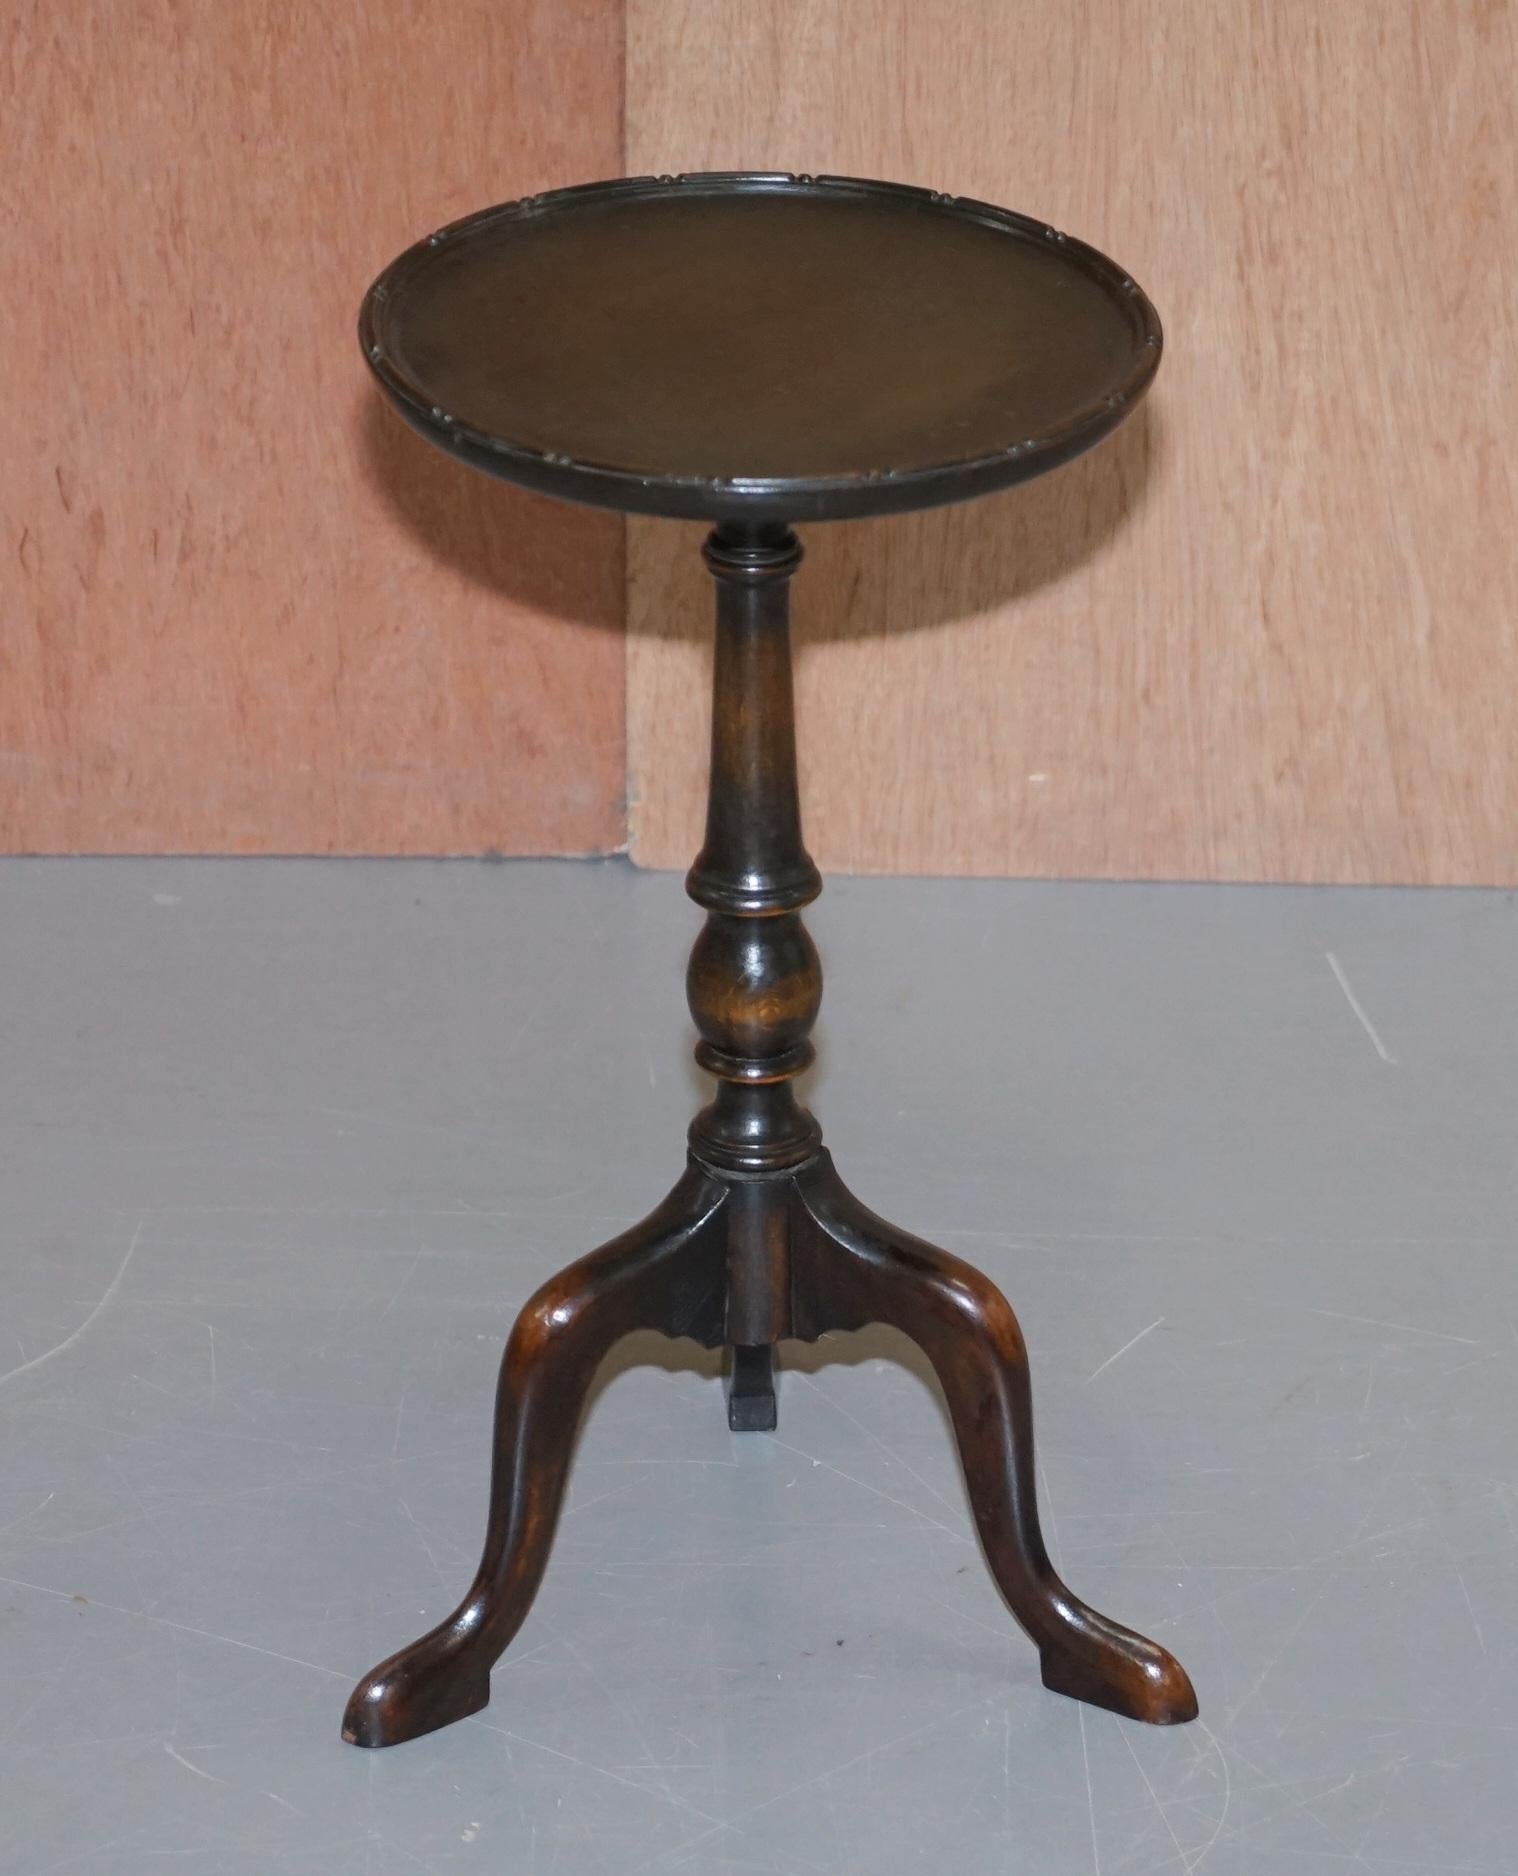 We are delighted to offer for sale this lovely antique Scottish Mahogany lamp or side table with nicely turned column base and carved top edge

A good looking well made tripod table in good condition throughout, we have cleaned waxed and polished